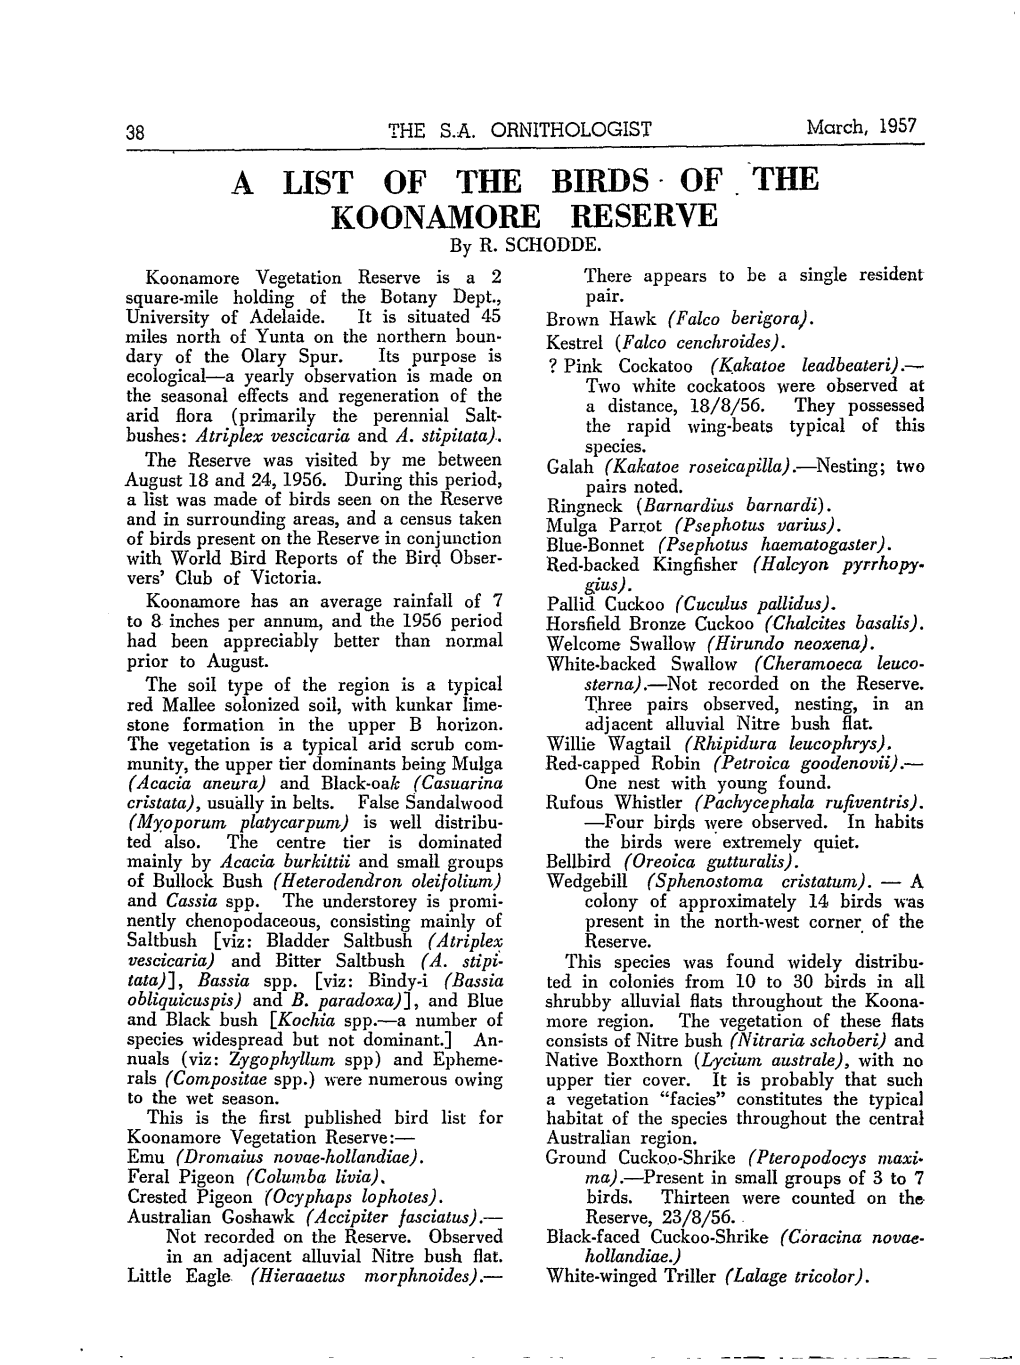 A LIST of the BIRDS, of the KOONAMORE RESERVE by R